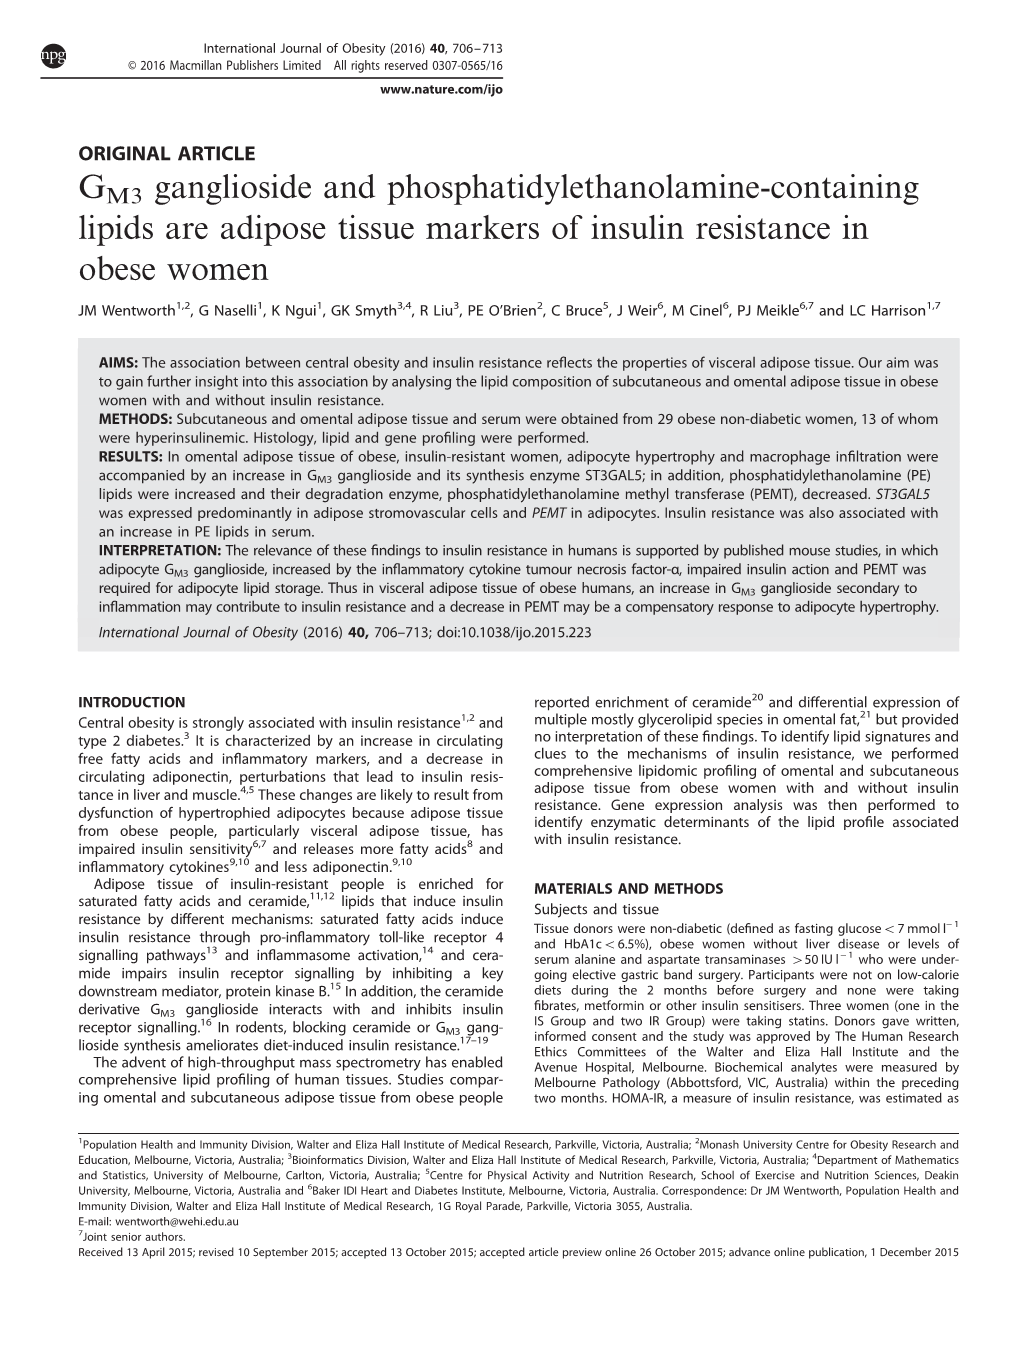 GM3 Ganglioside and Phosphatidylethanolamine-Containing Lipids Are Adipose Tissue Markers of Insulin Resistance in Obese Women